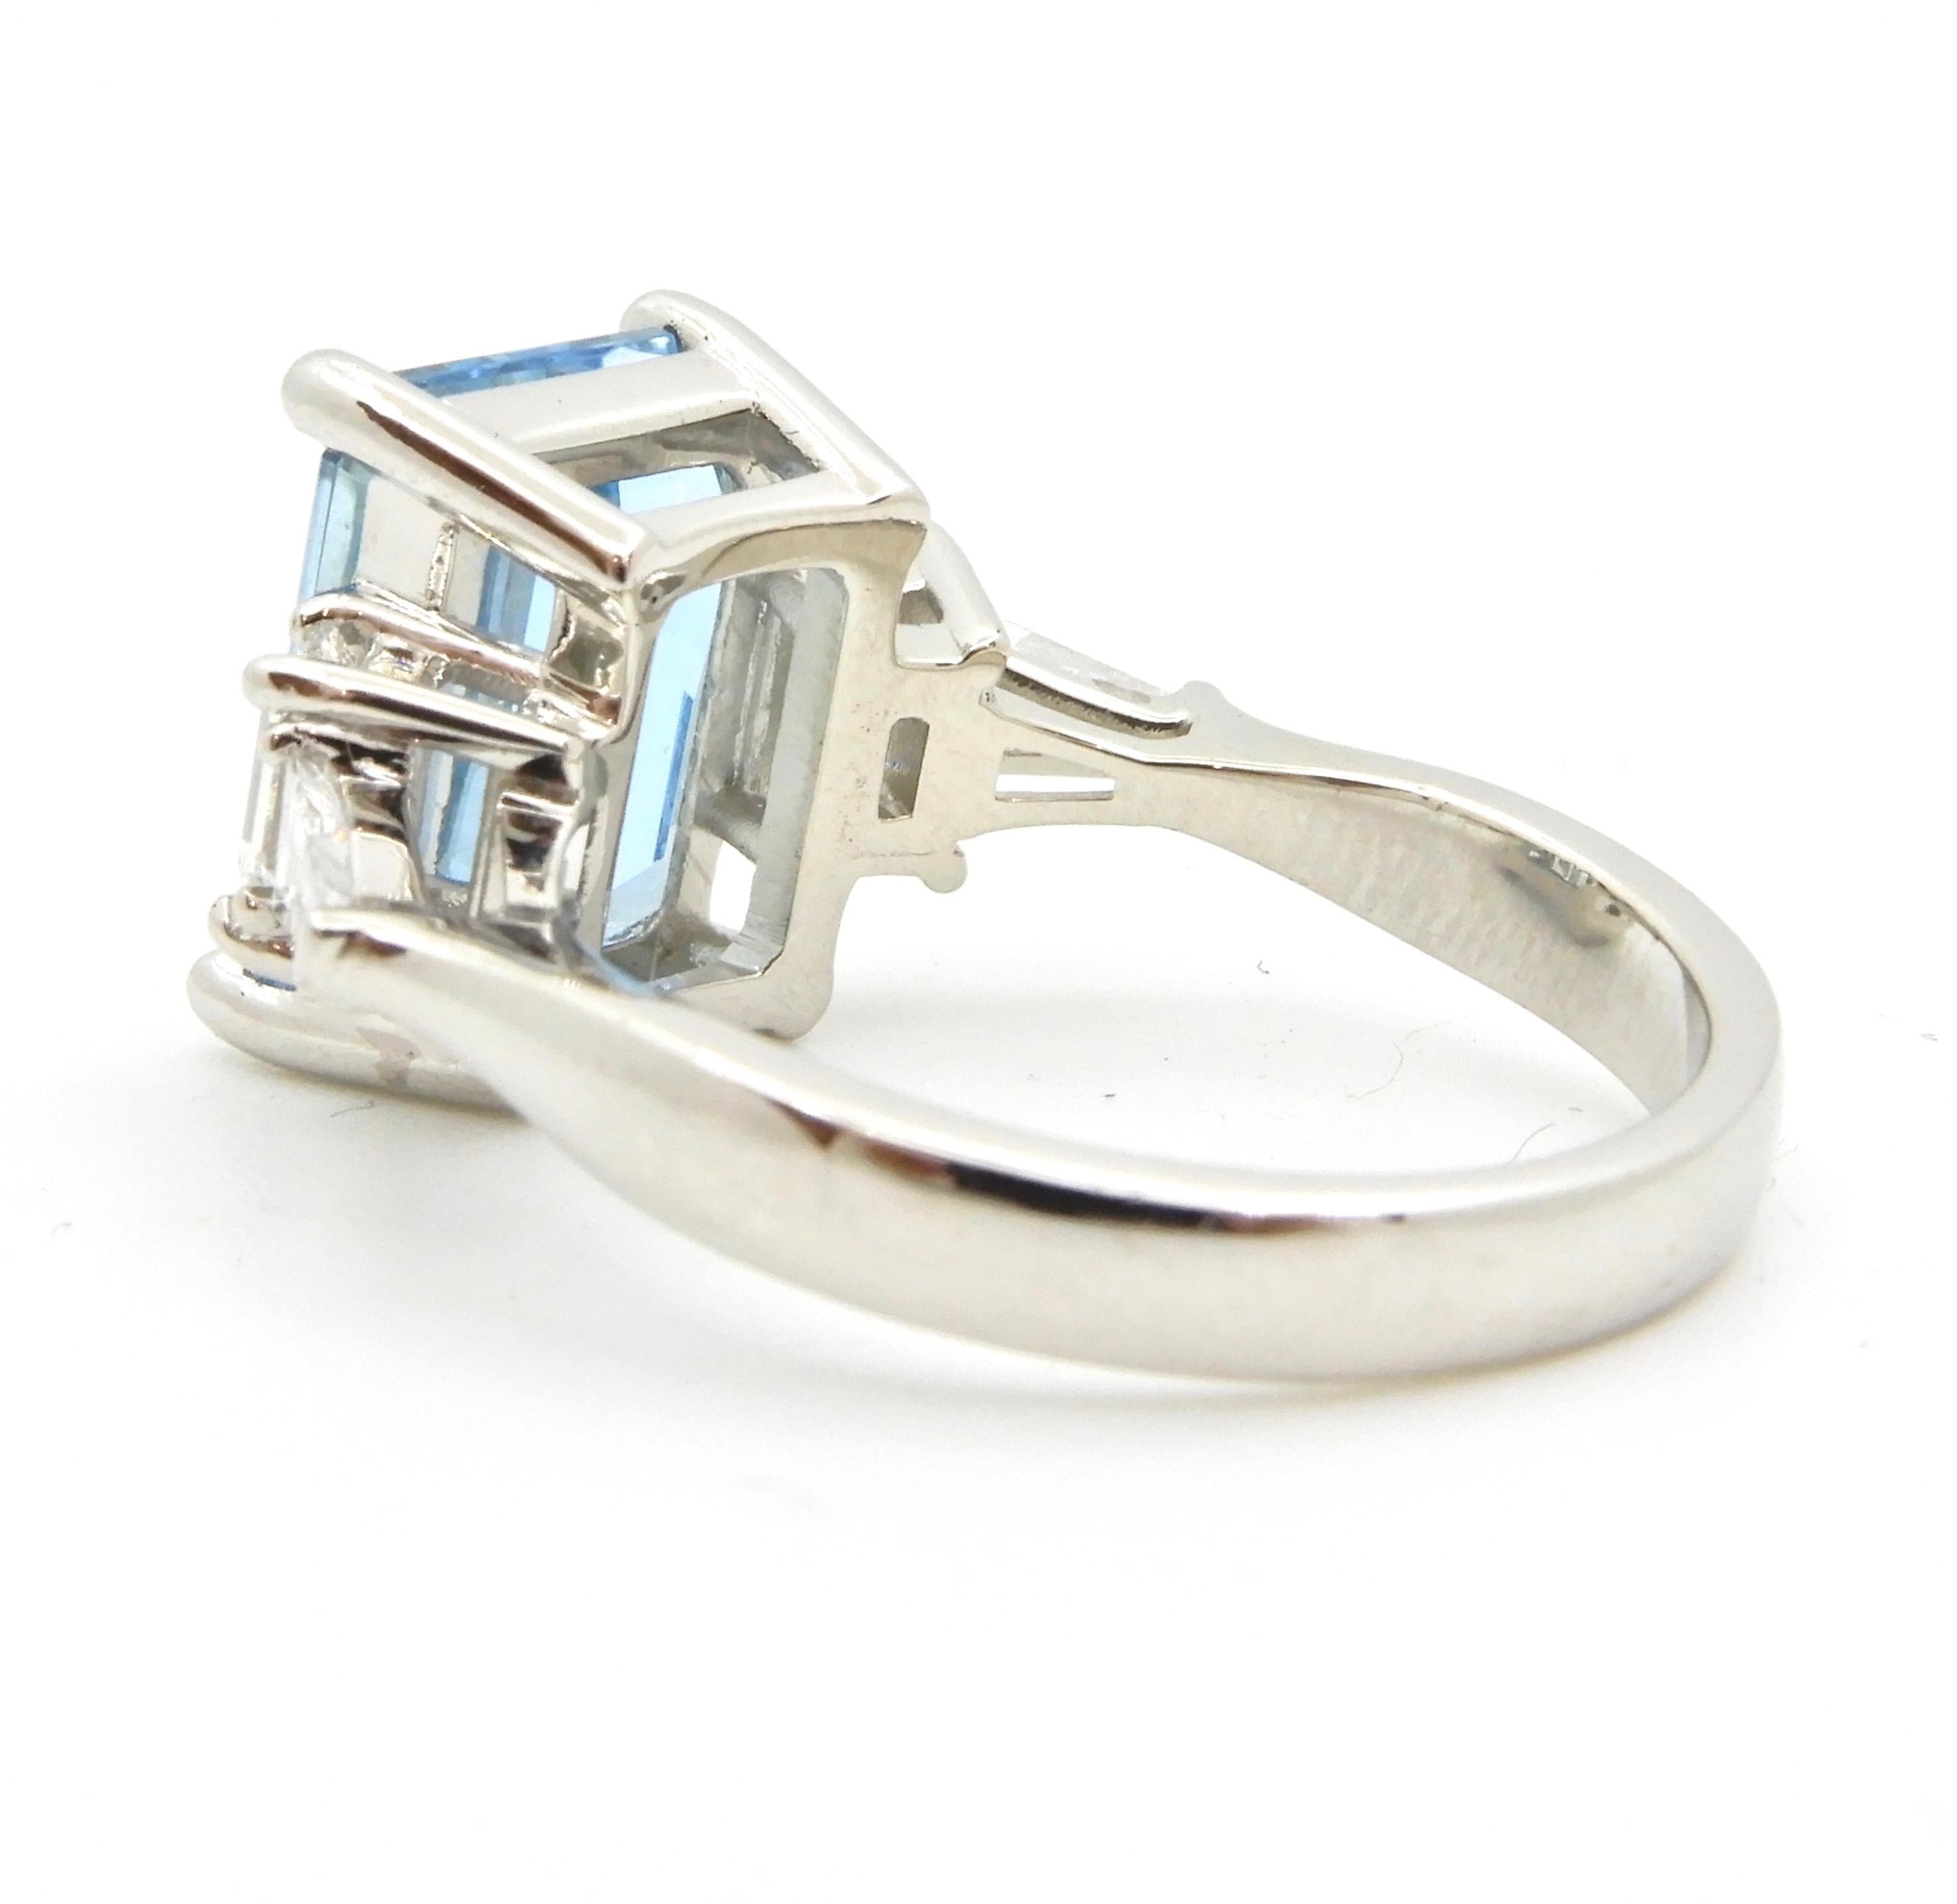 Your search for the ultimate Aquamarine ring is over. This 4.13 Carat Emerald Cut Aquamarine and Diamond Platinum Engagement Ring ticks all the boxes. It has a rounded, flat edge band with rising shoulders each with two split galleries and hold one